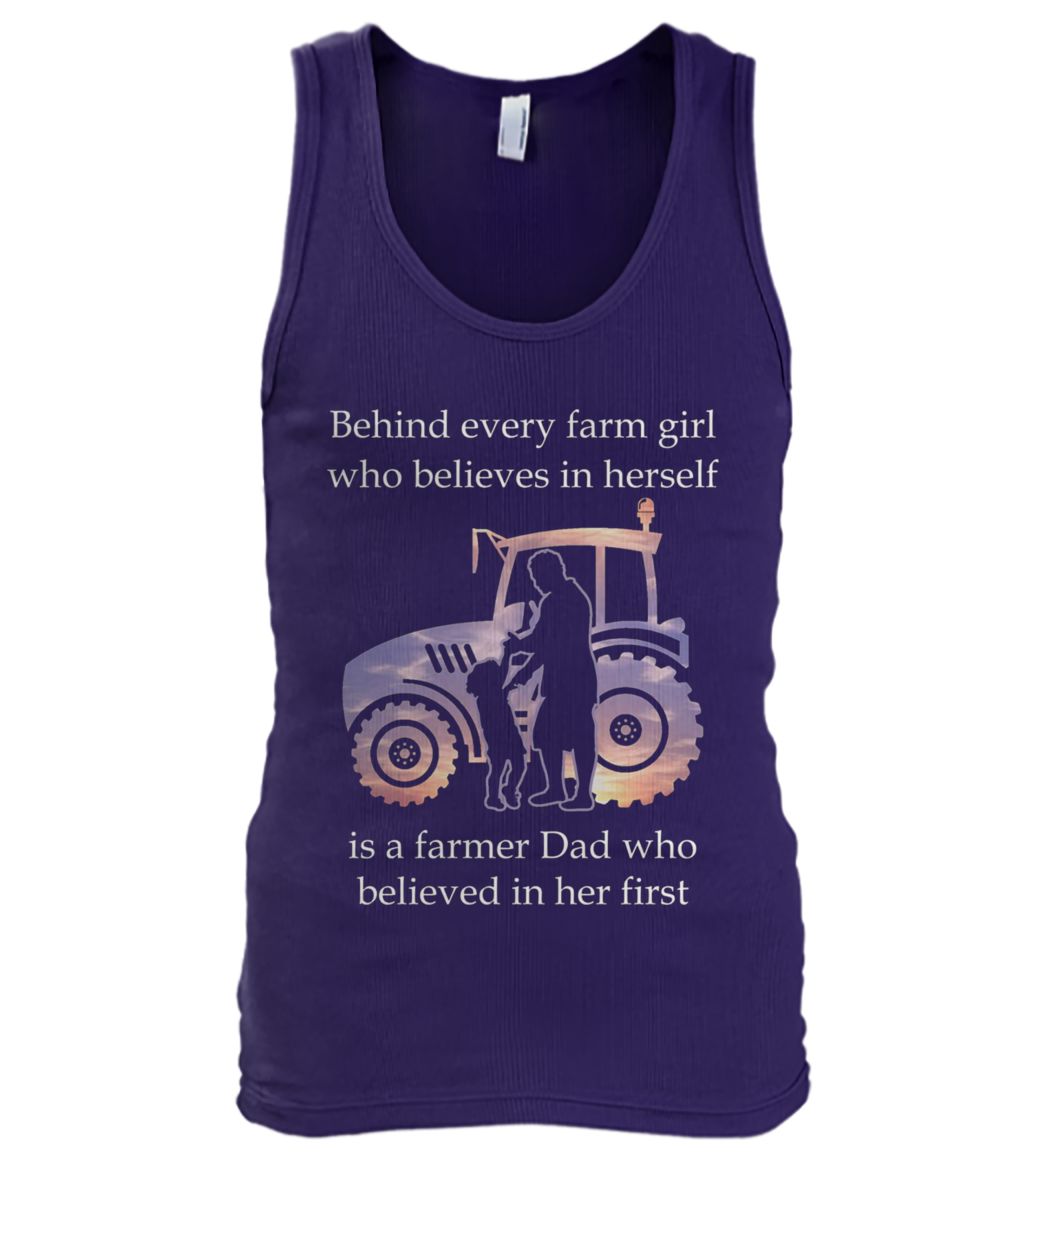 Behind every farm girl who believes in herself is a farmer dad who believed in her first men's tank top